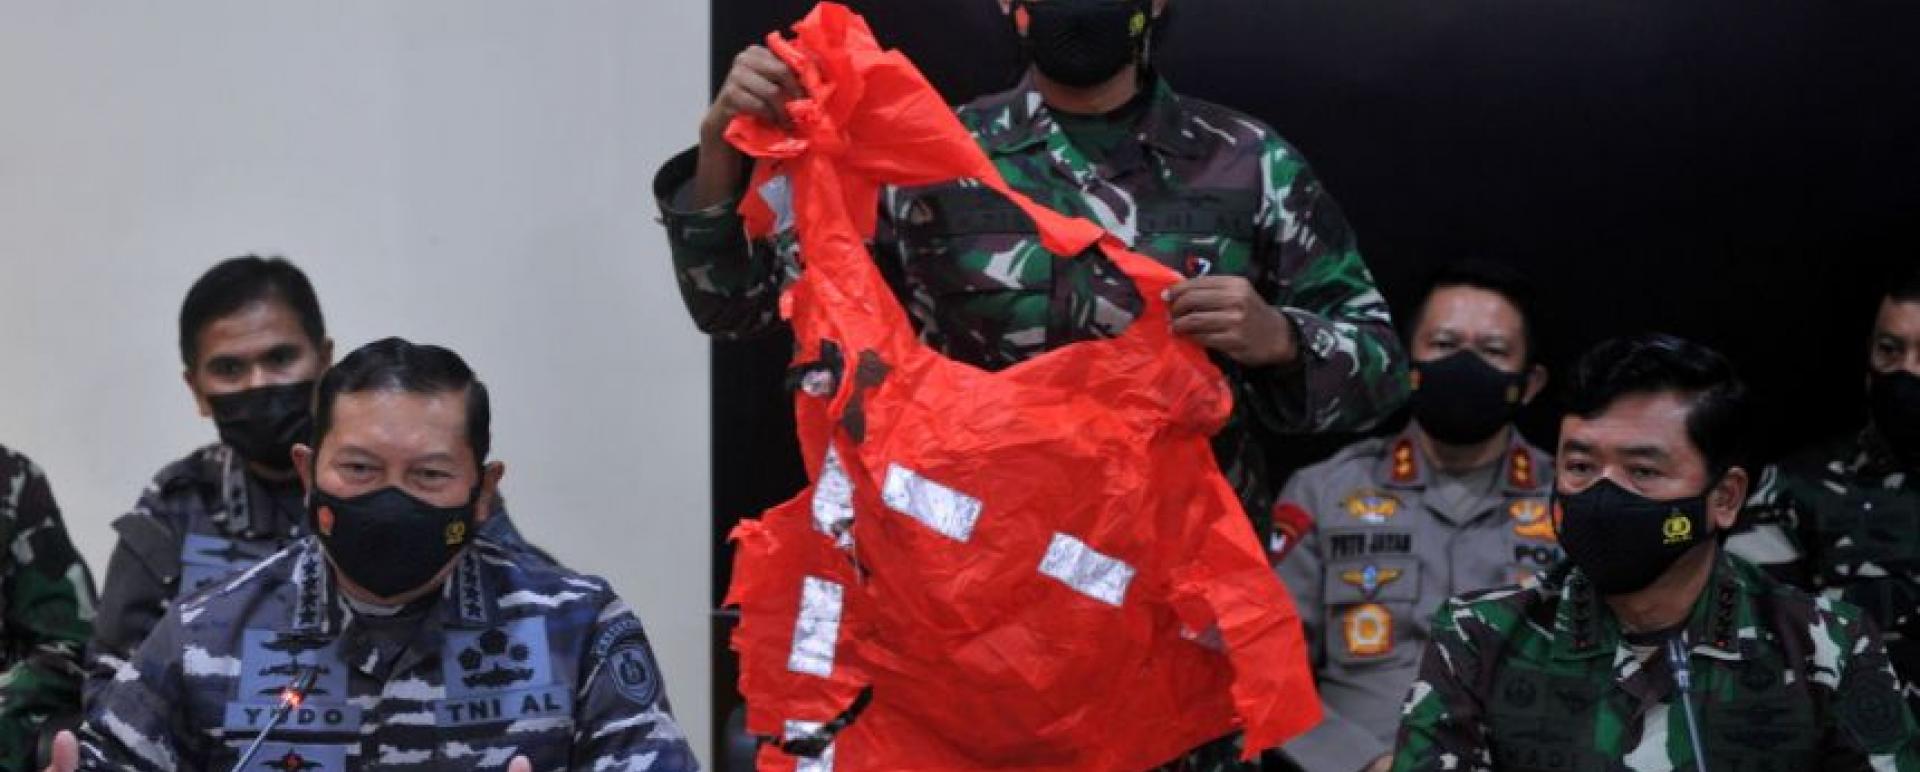 A military personnel holds an escape suit believed to be from the sunken submarine during a media conference in Bali, on April 25, 2021.PHOTO: X03535